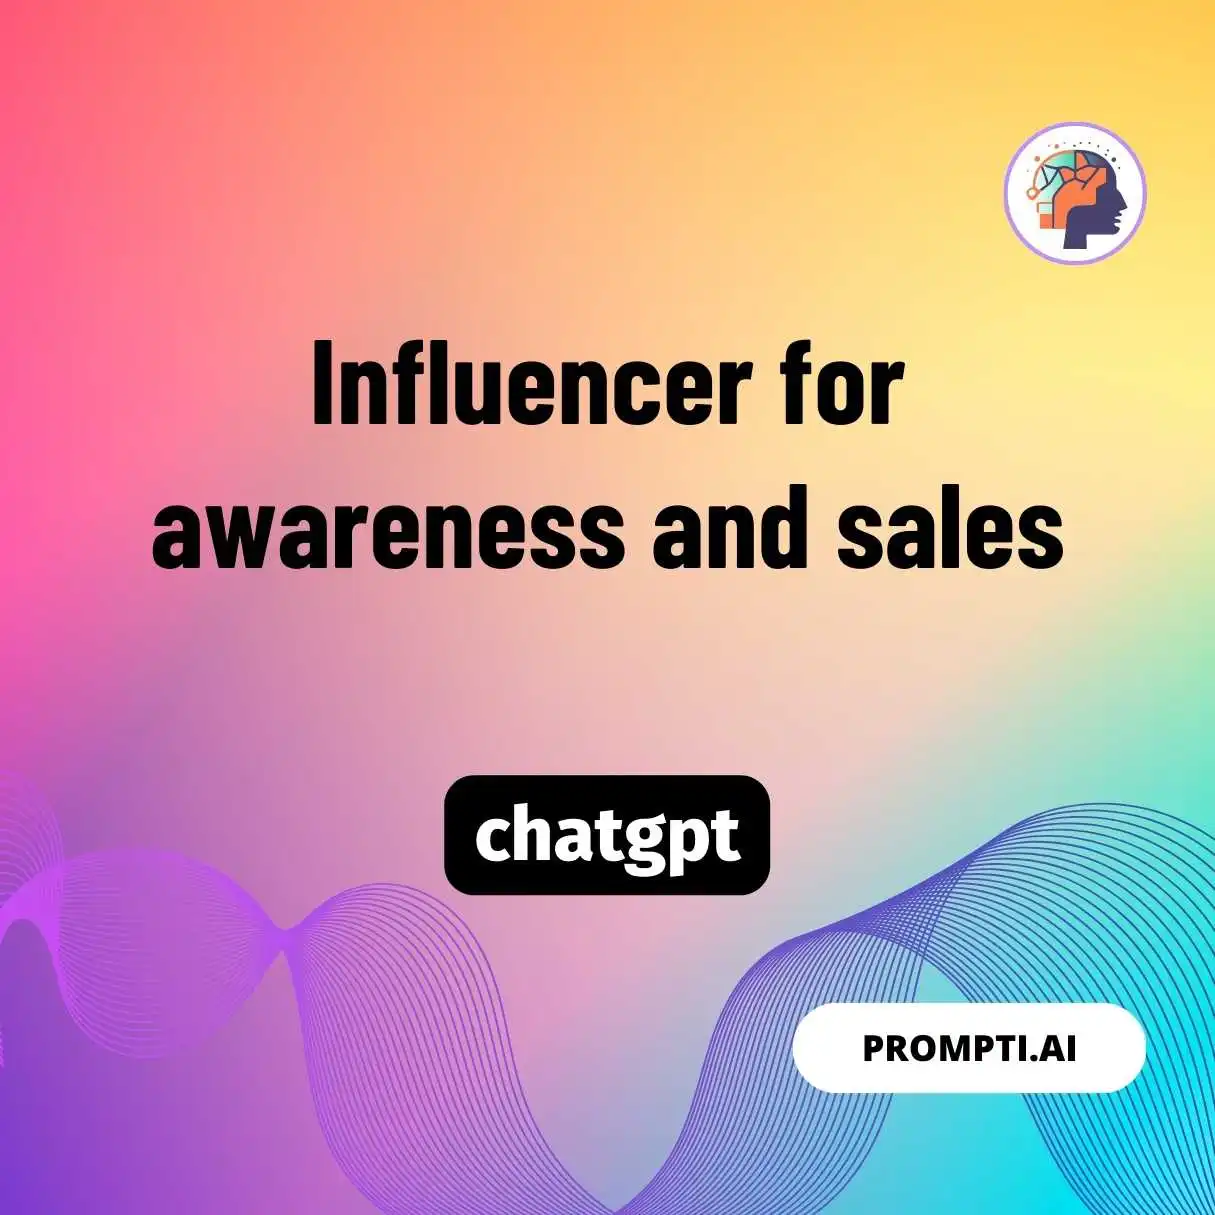 Influencer for awareness and sales